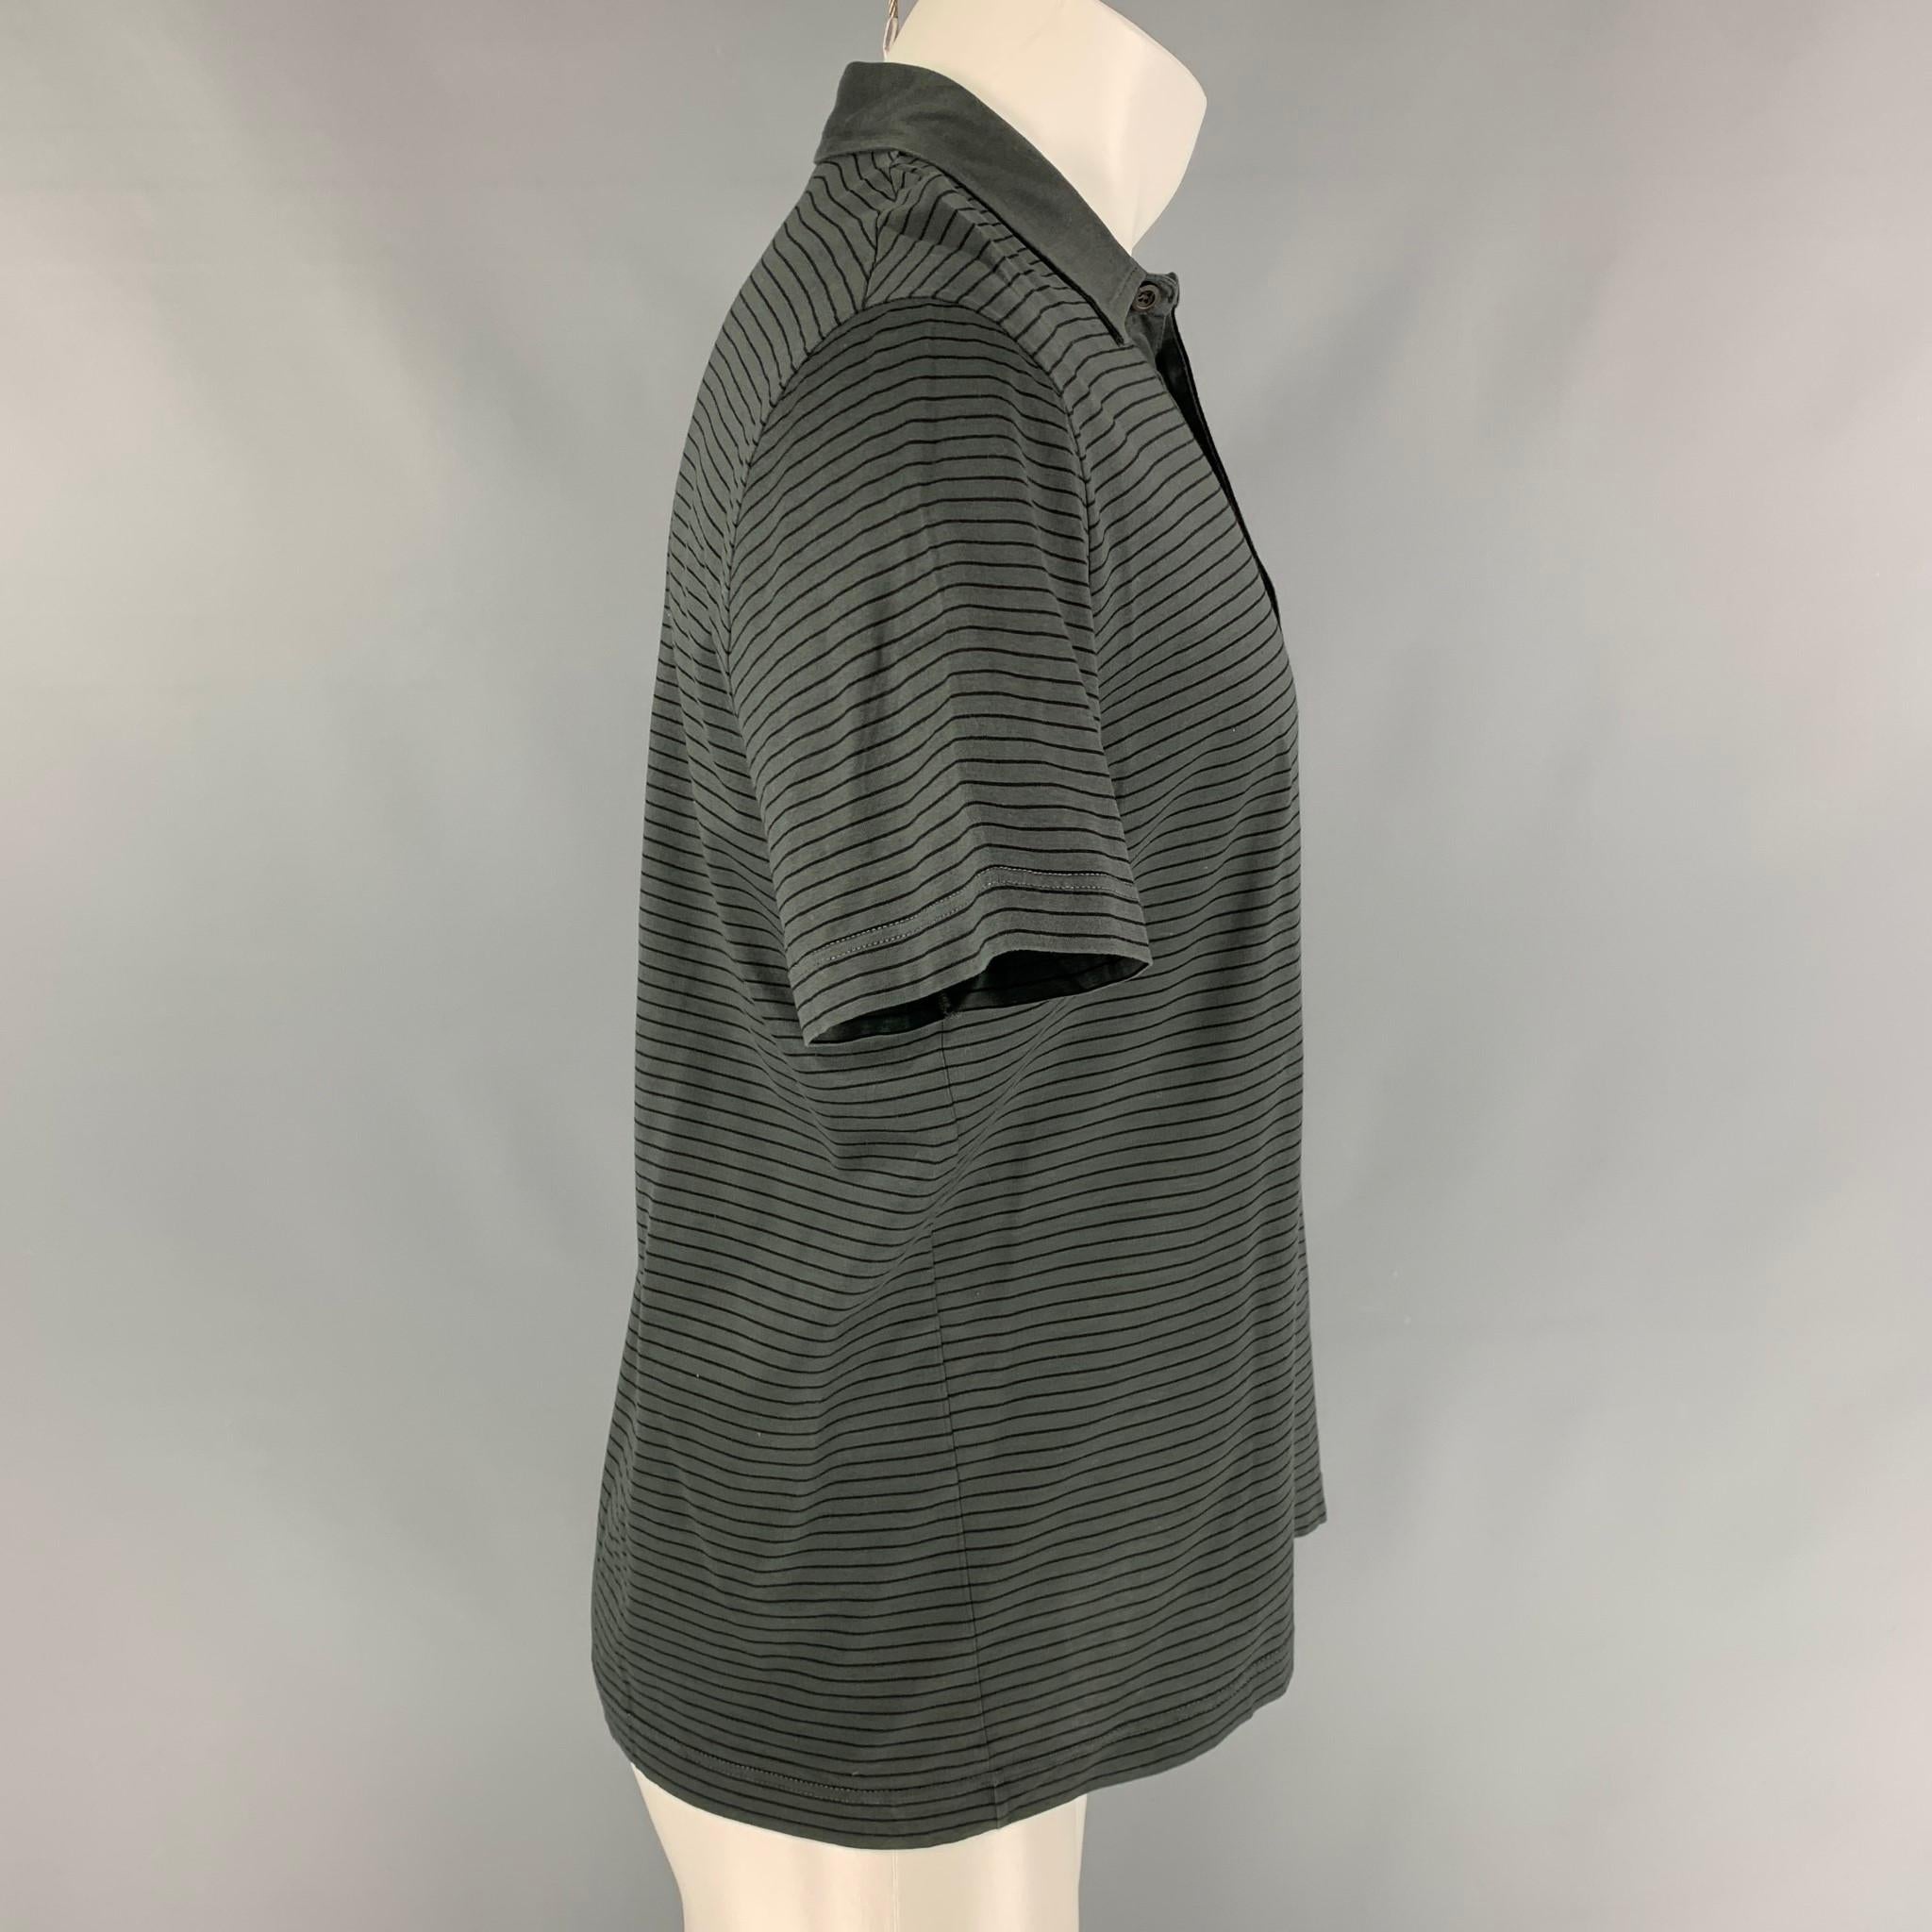 PRADA polo comes in a grey & black stripe cotton featuring a spread collar and a buttoned closure. Made in Italy. 

Very Good Pre-Owned Condition.
Marked: L

Measurements:

Shoulder: 18.5 in.
Chest: 42 in.
Sleeve: 9 in.
Length: 26.5 in. 